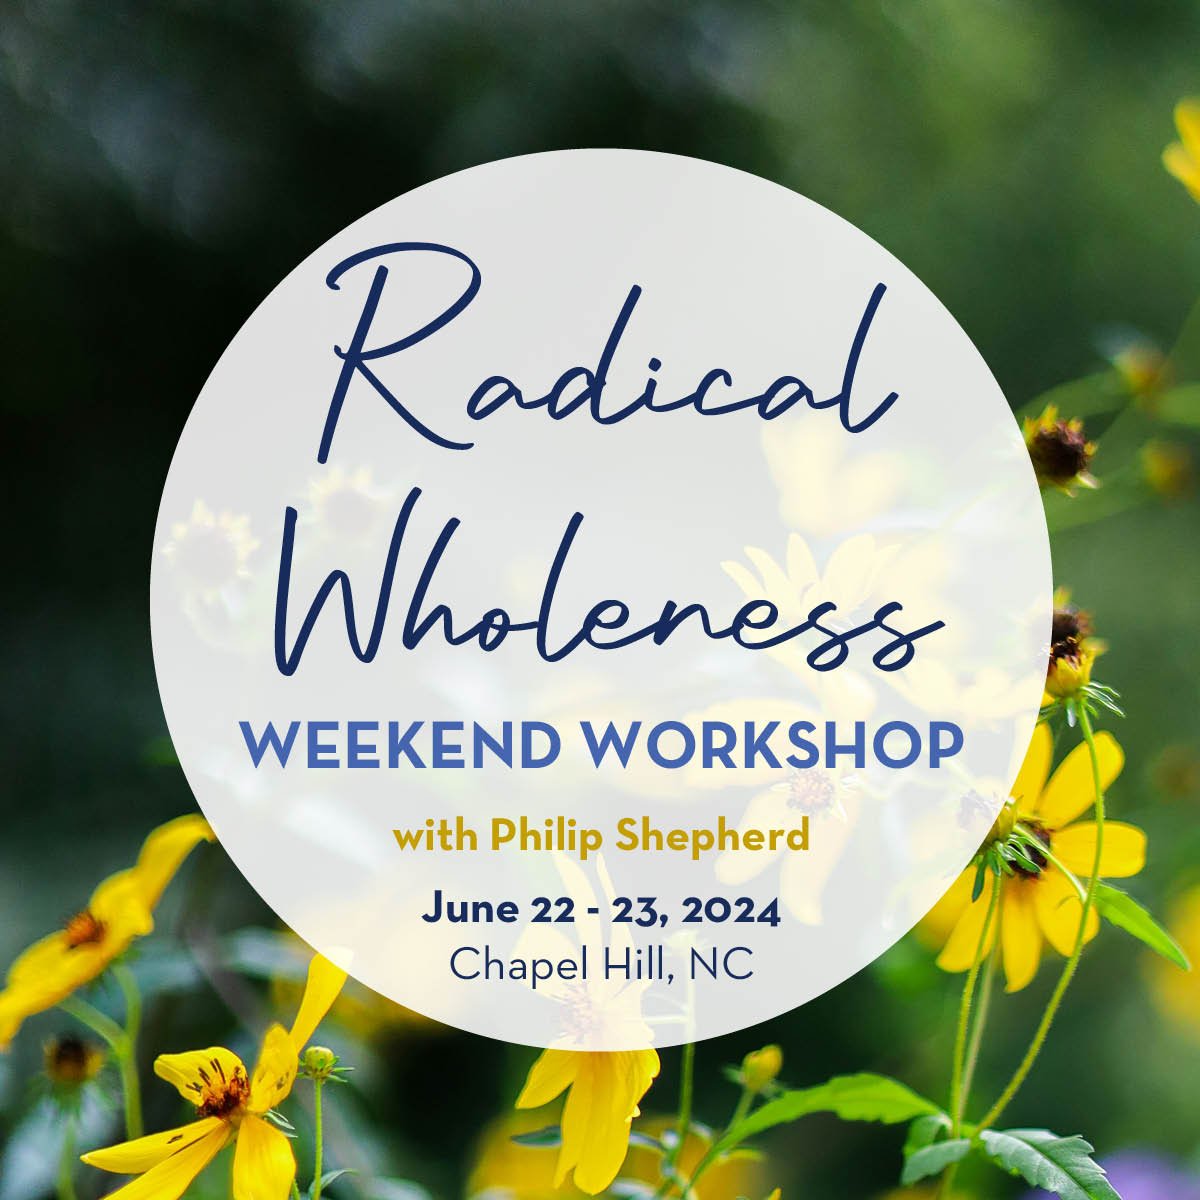 Radical Wholeness Weekend Workshop: Chapel Hill, NC - The Embodied Present Process